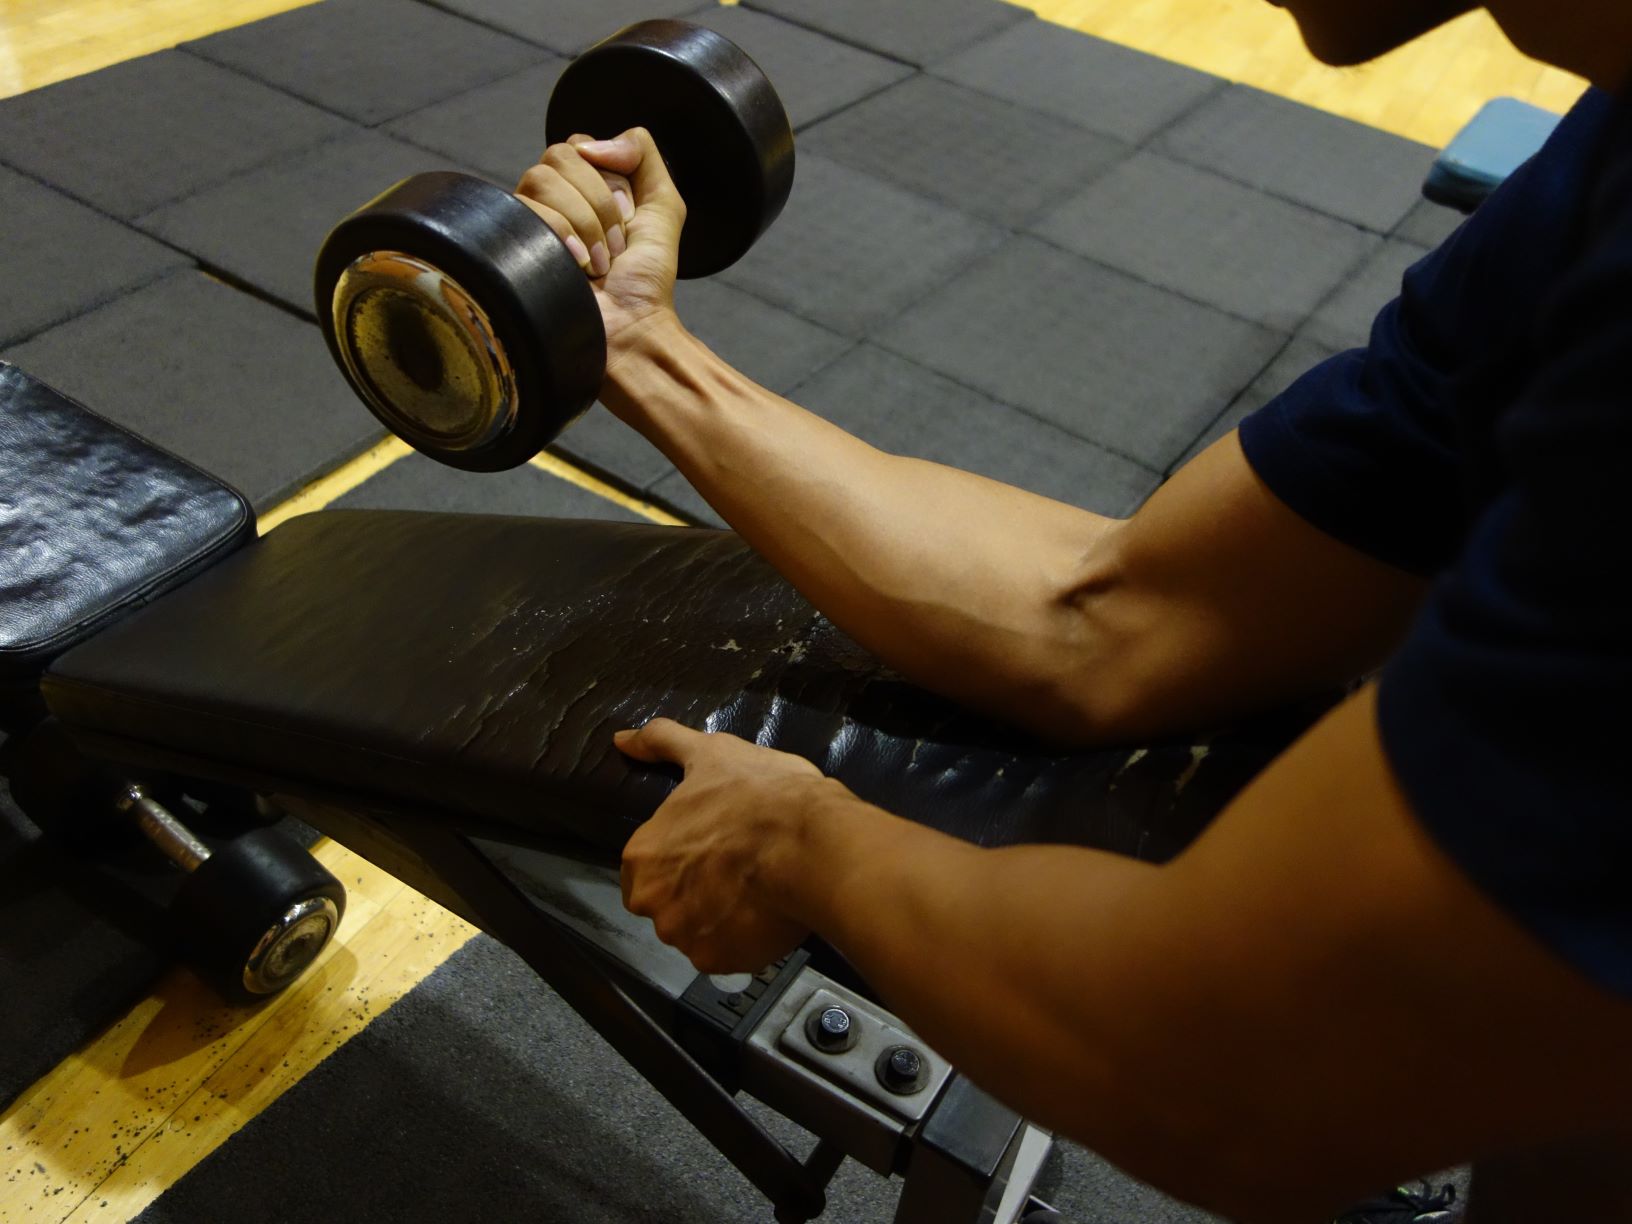 How to Do Wrist Curls for Bigger Forearm